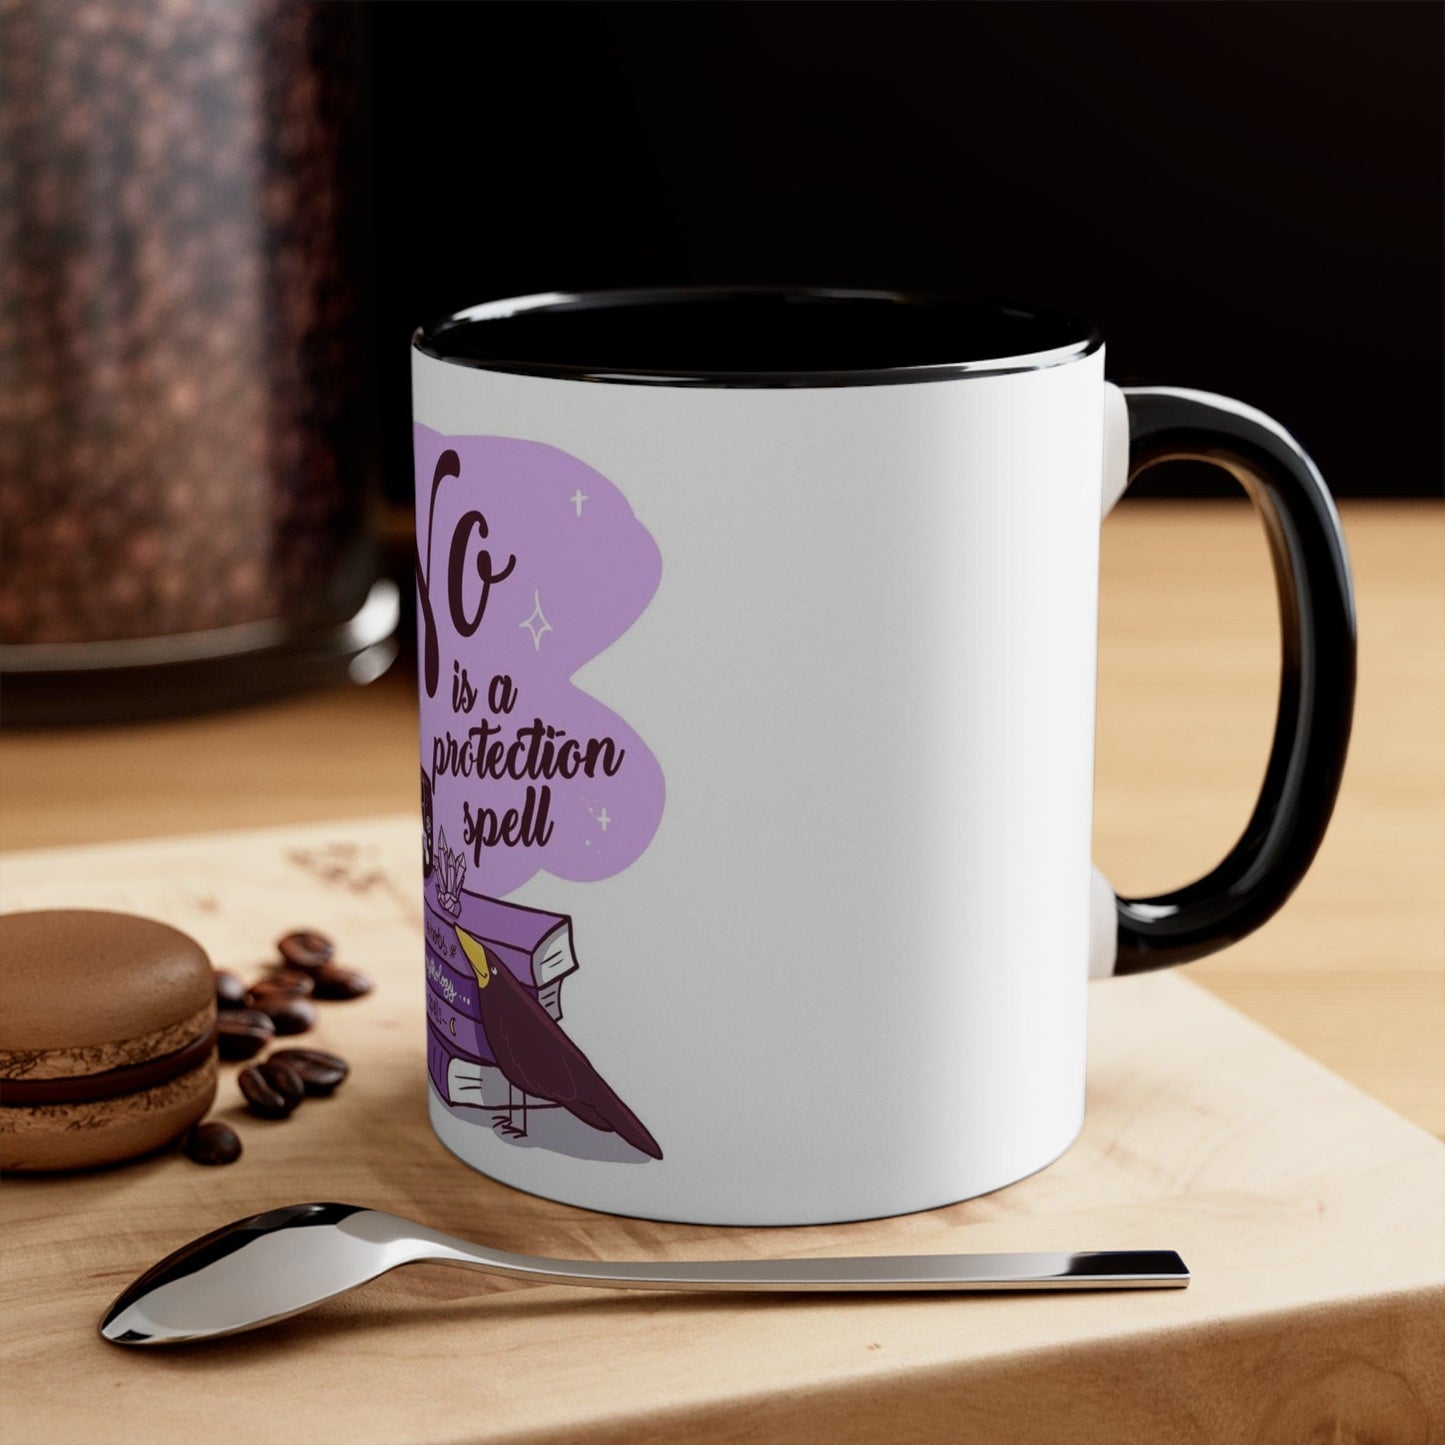 “No. Is a Protection Spell” Coffee Mug